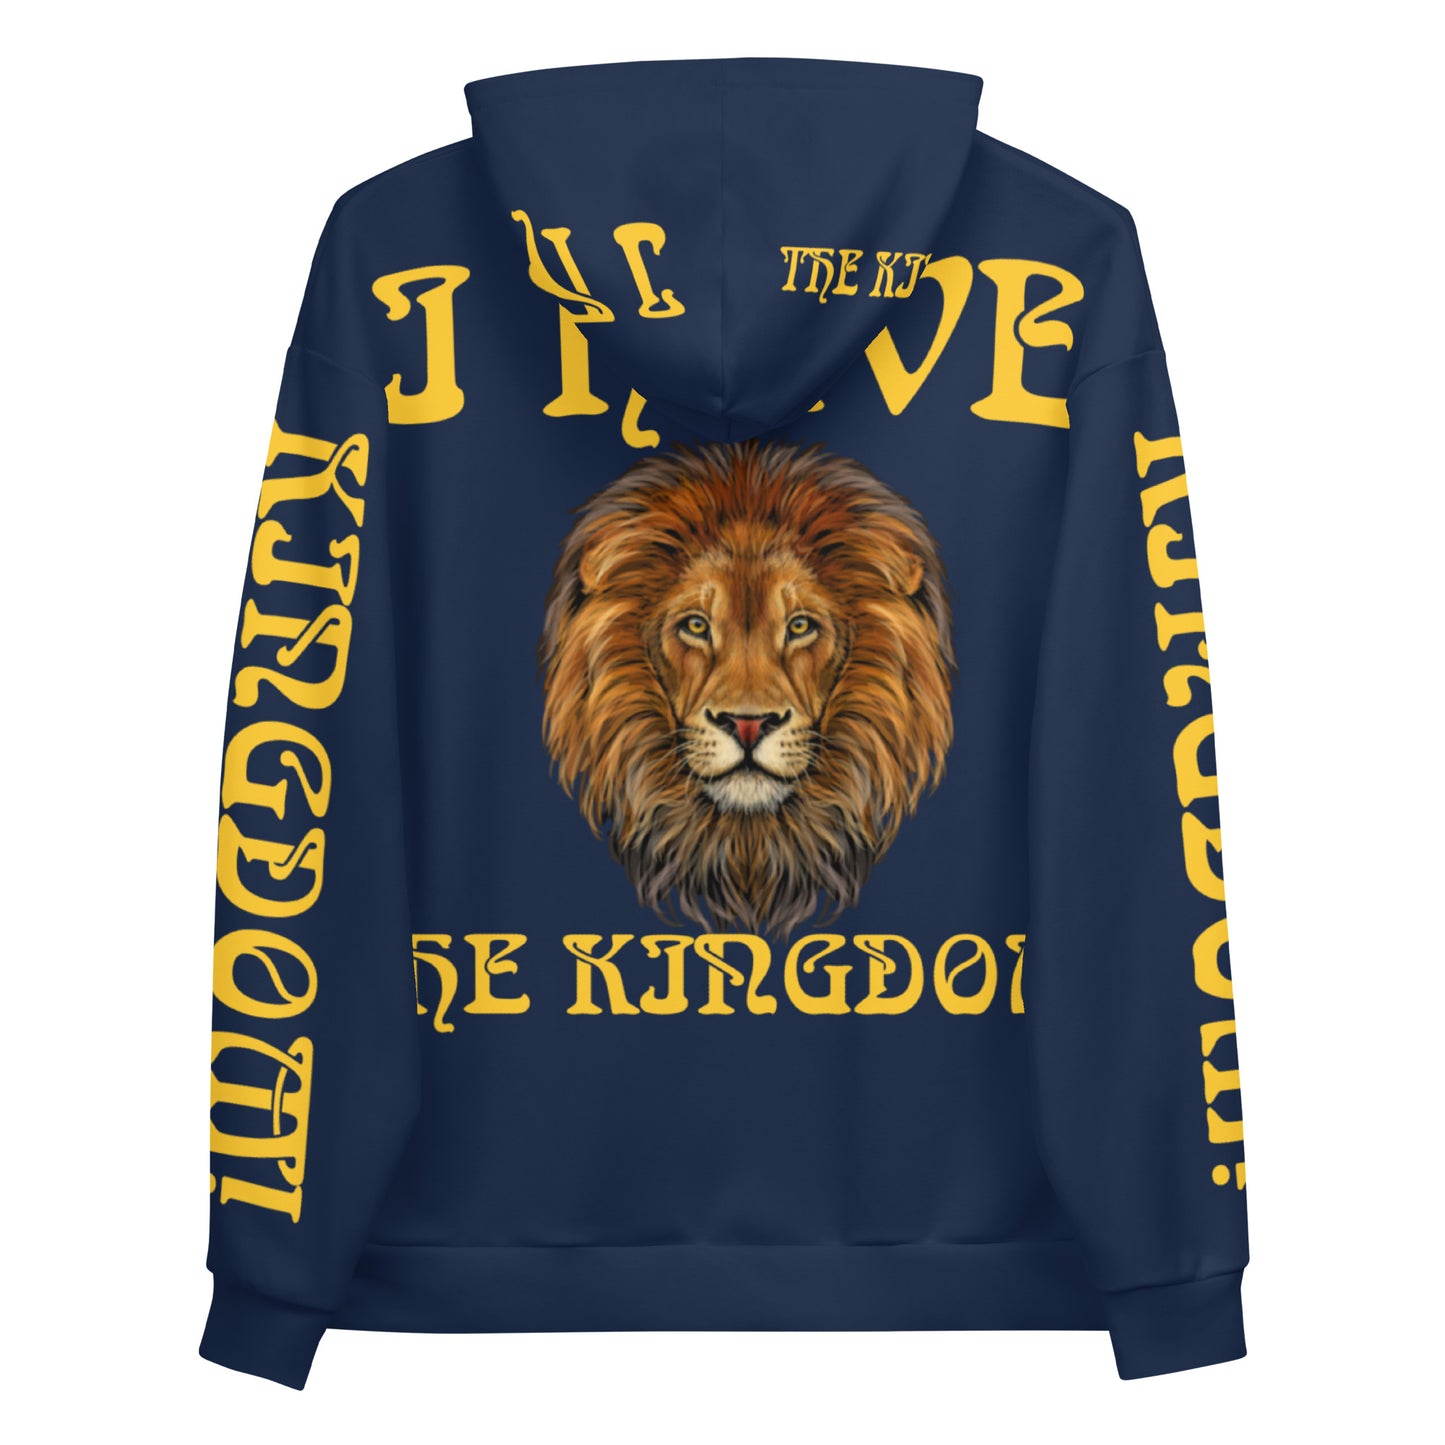 “I HAVE THE KINGDOM!”Navy Unisex Hoodie W/Yellow Font